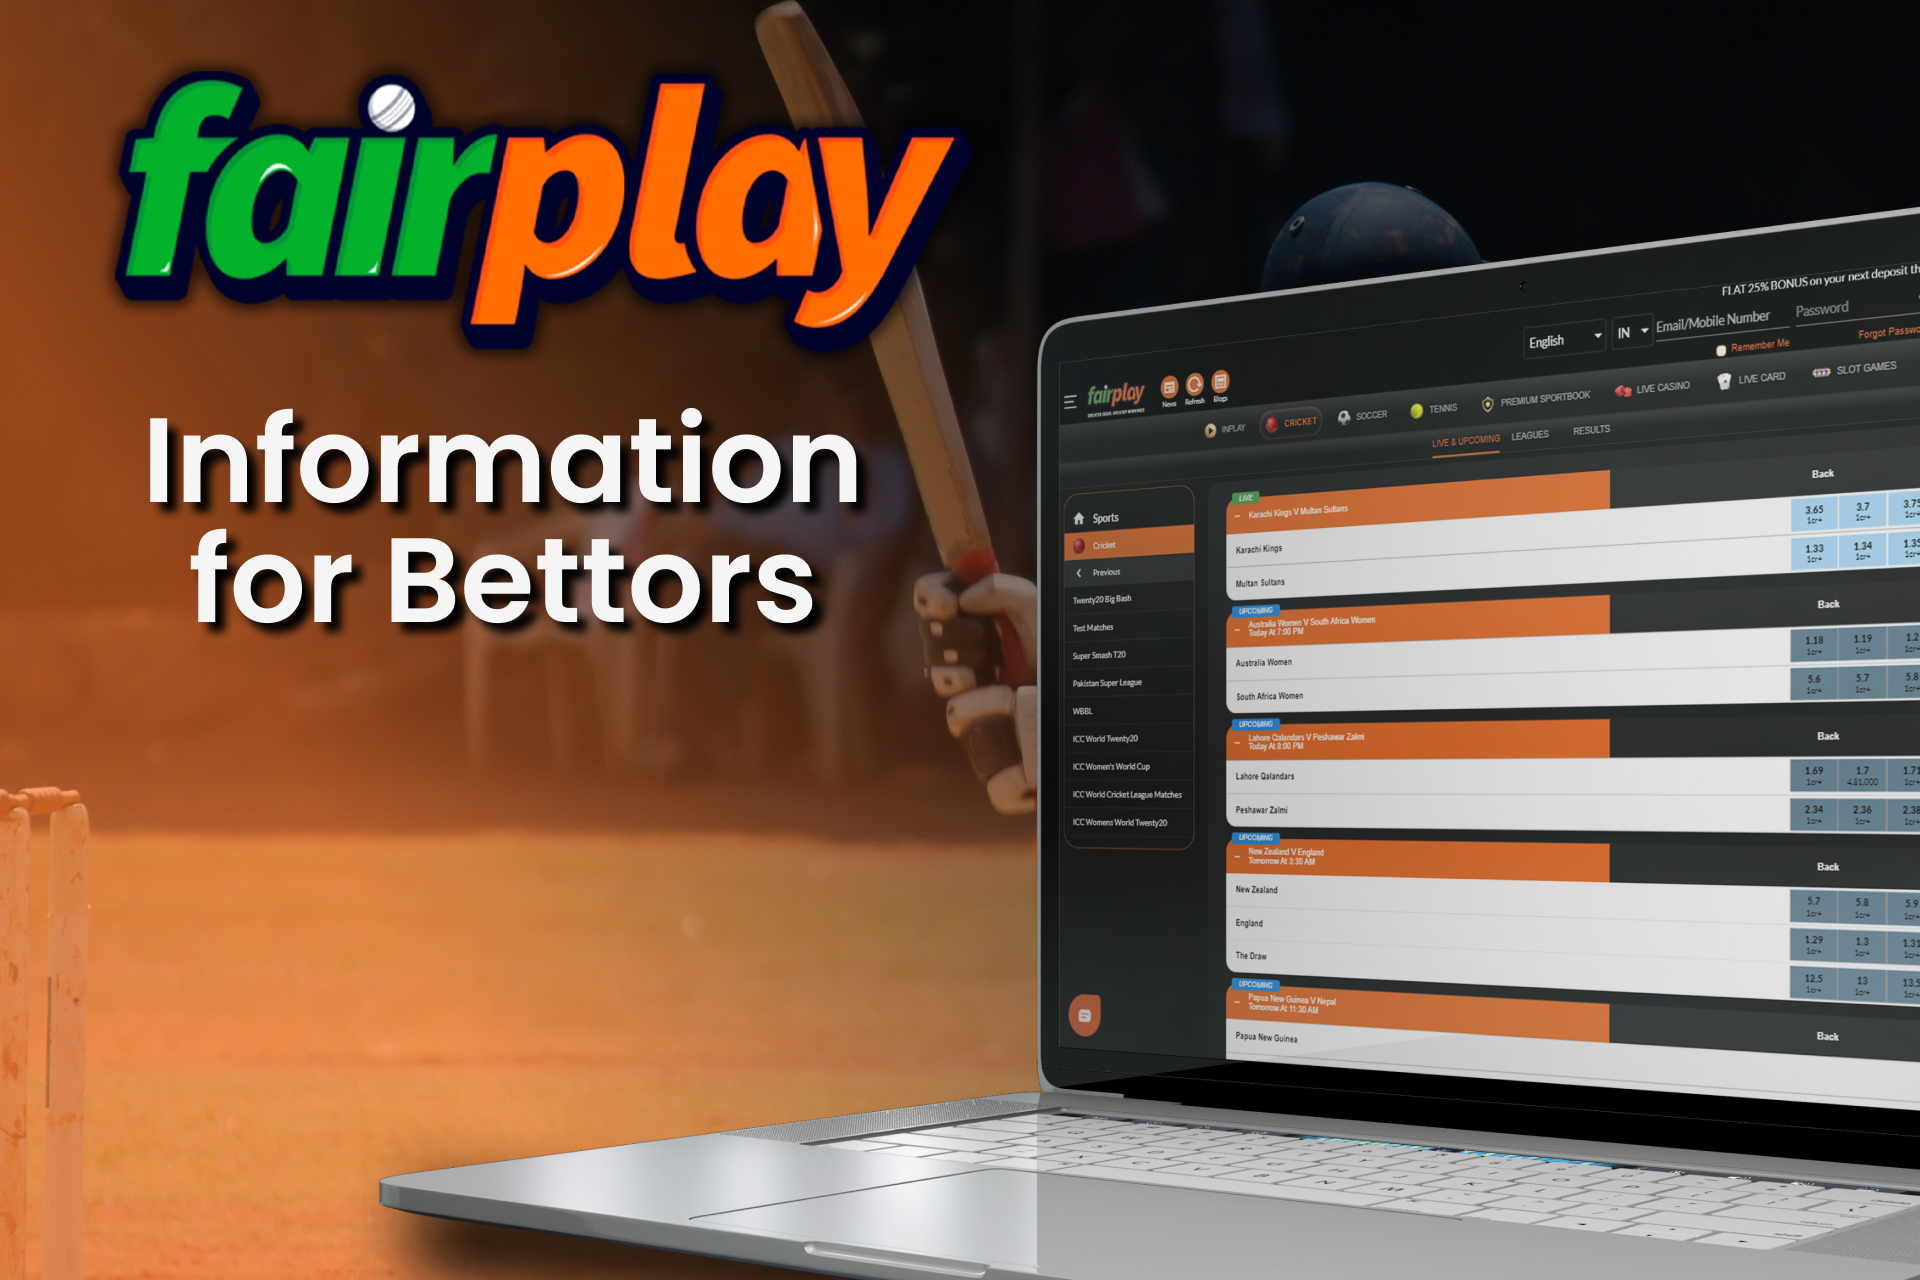 Find out about IPL at Fairplay.